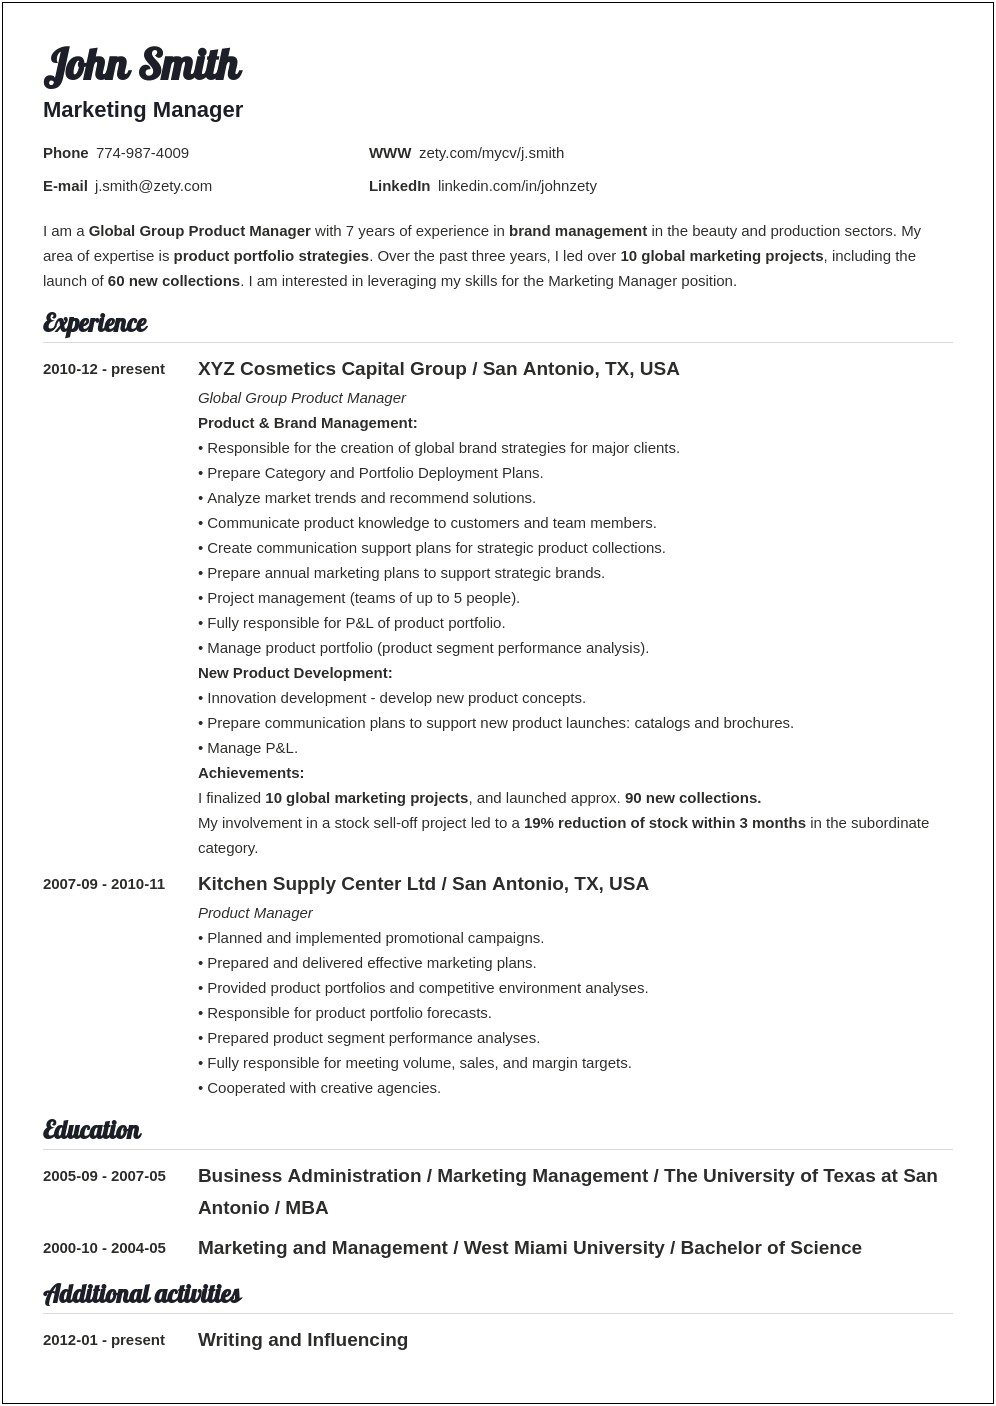 Skills And Abilities For Education Resume